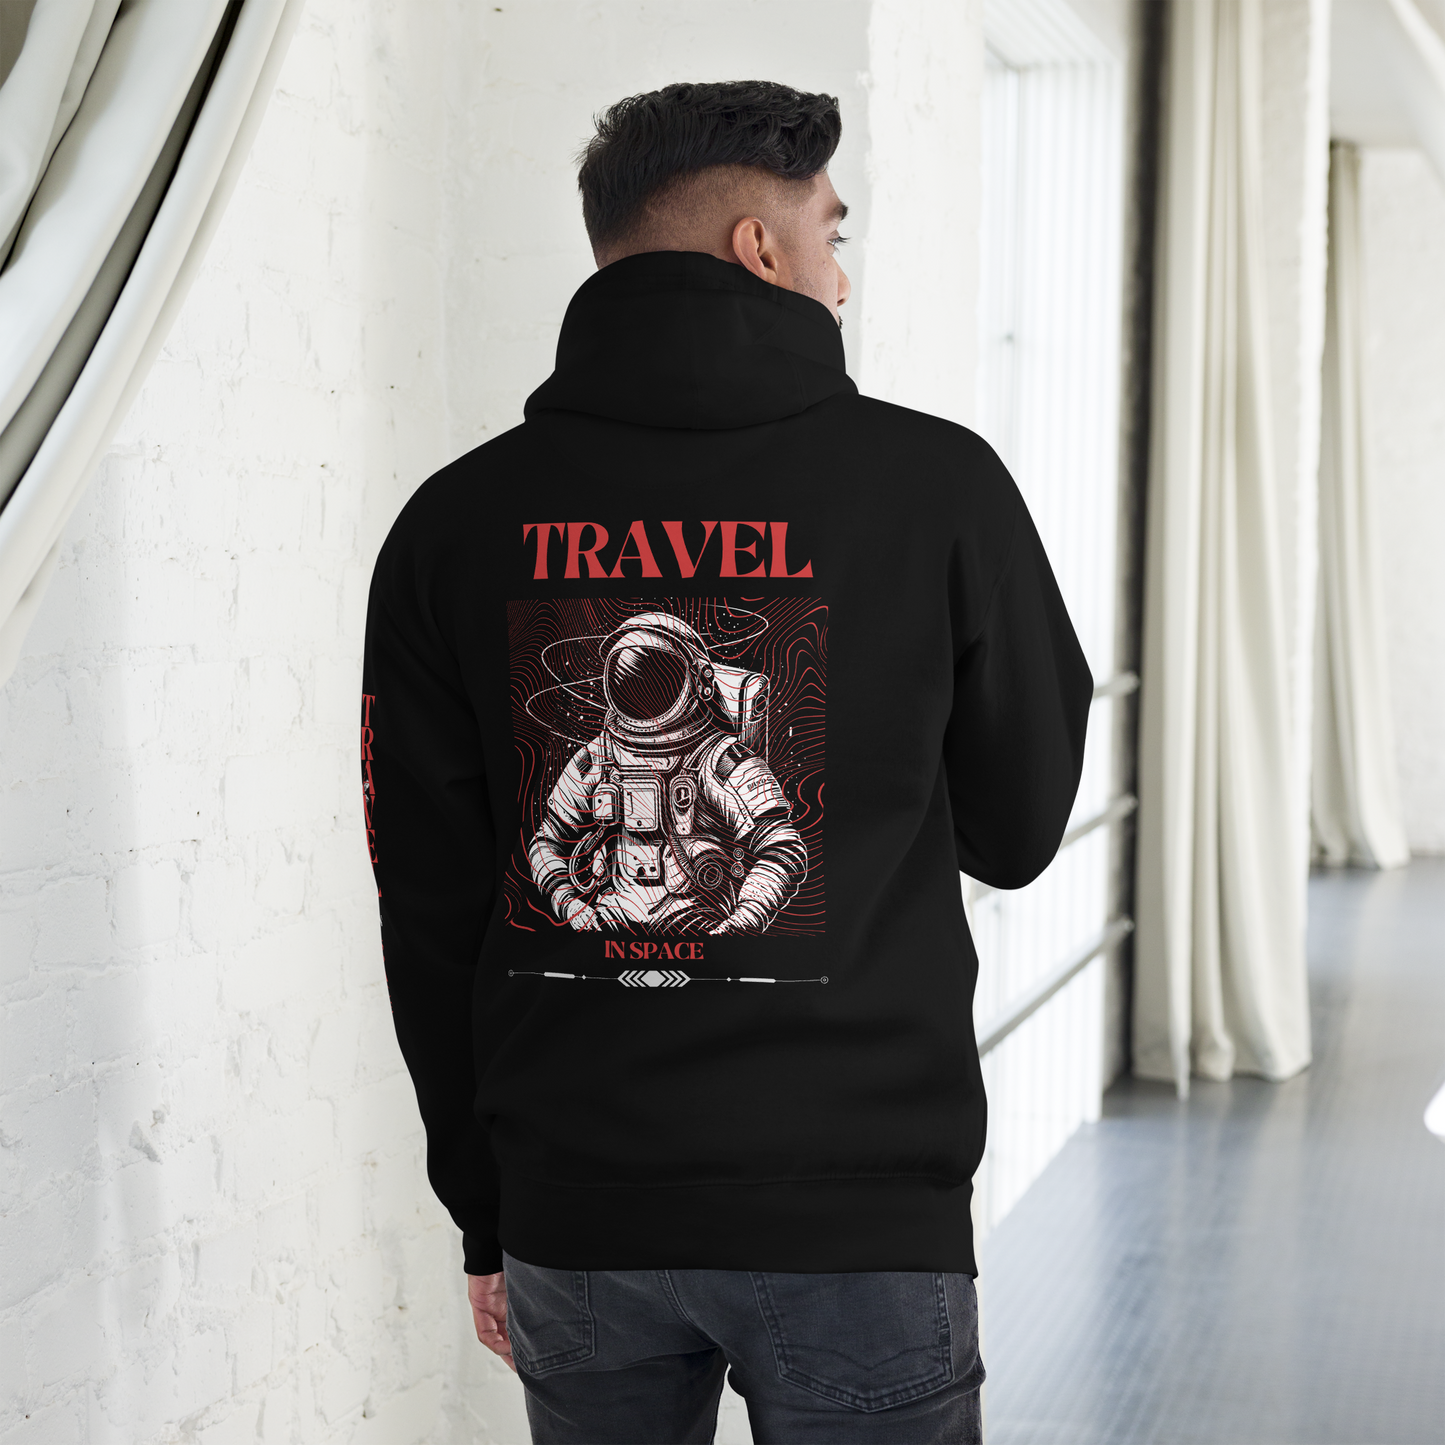 Doubleb ™ - Travel in space